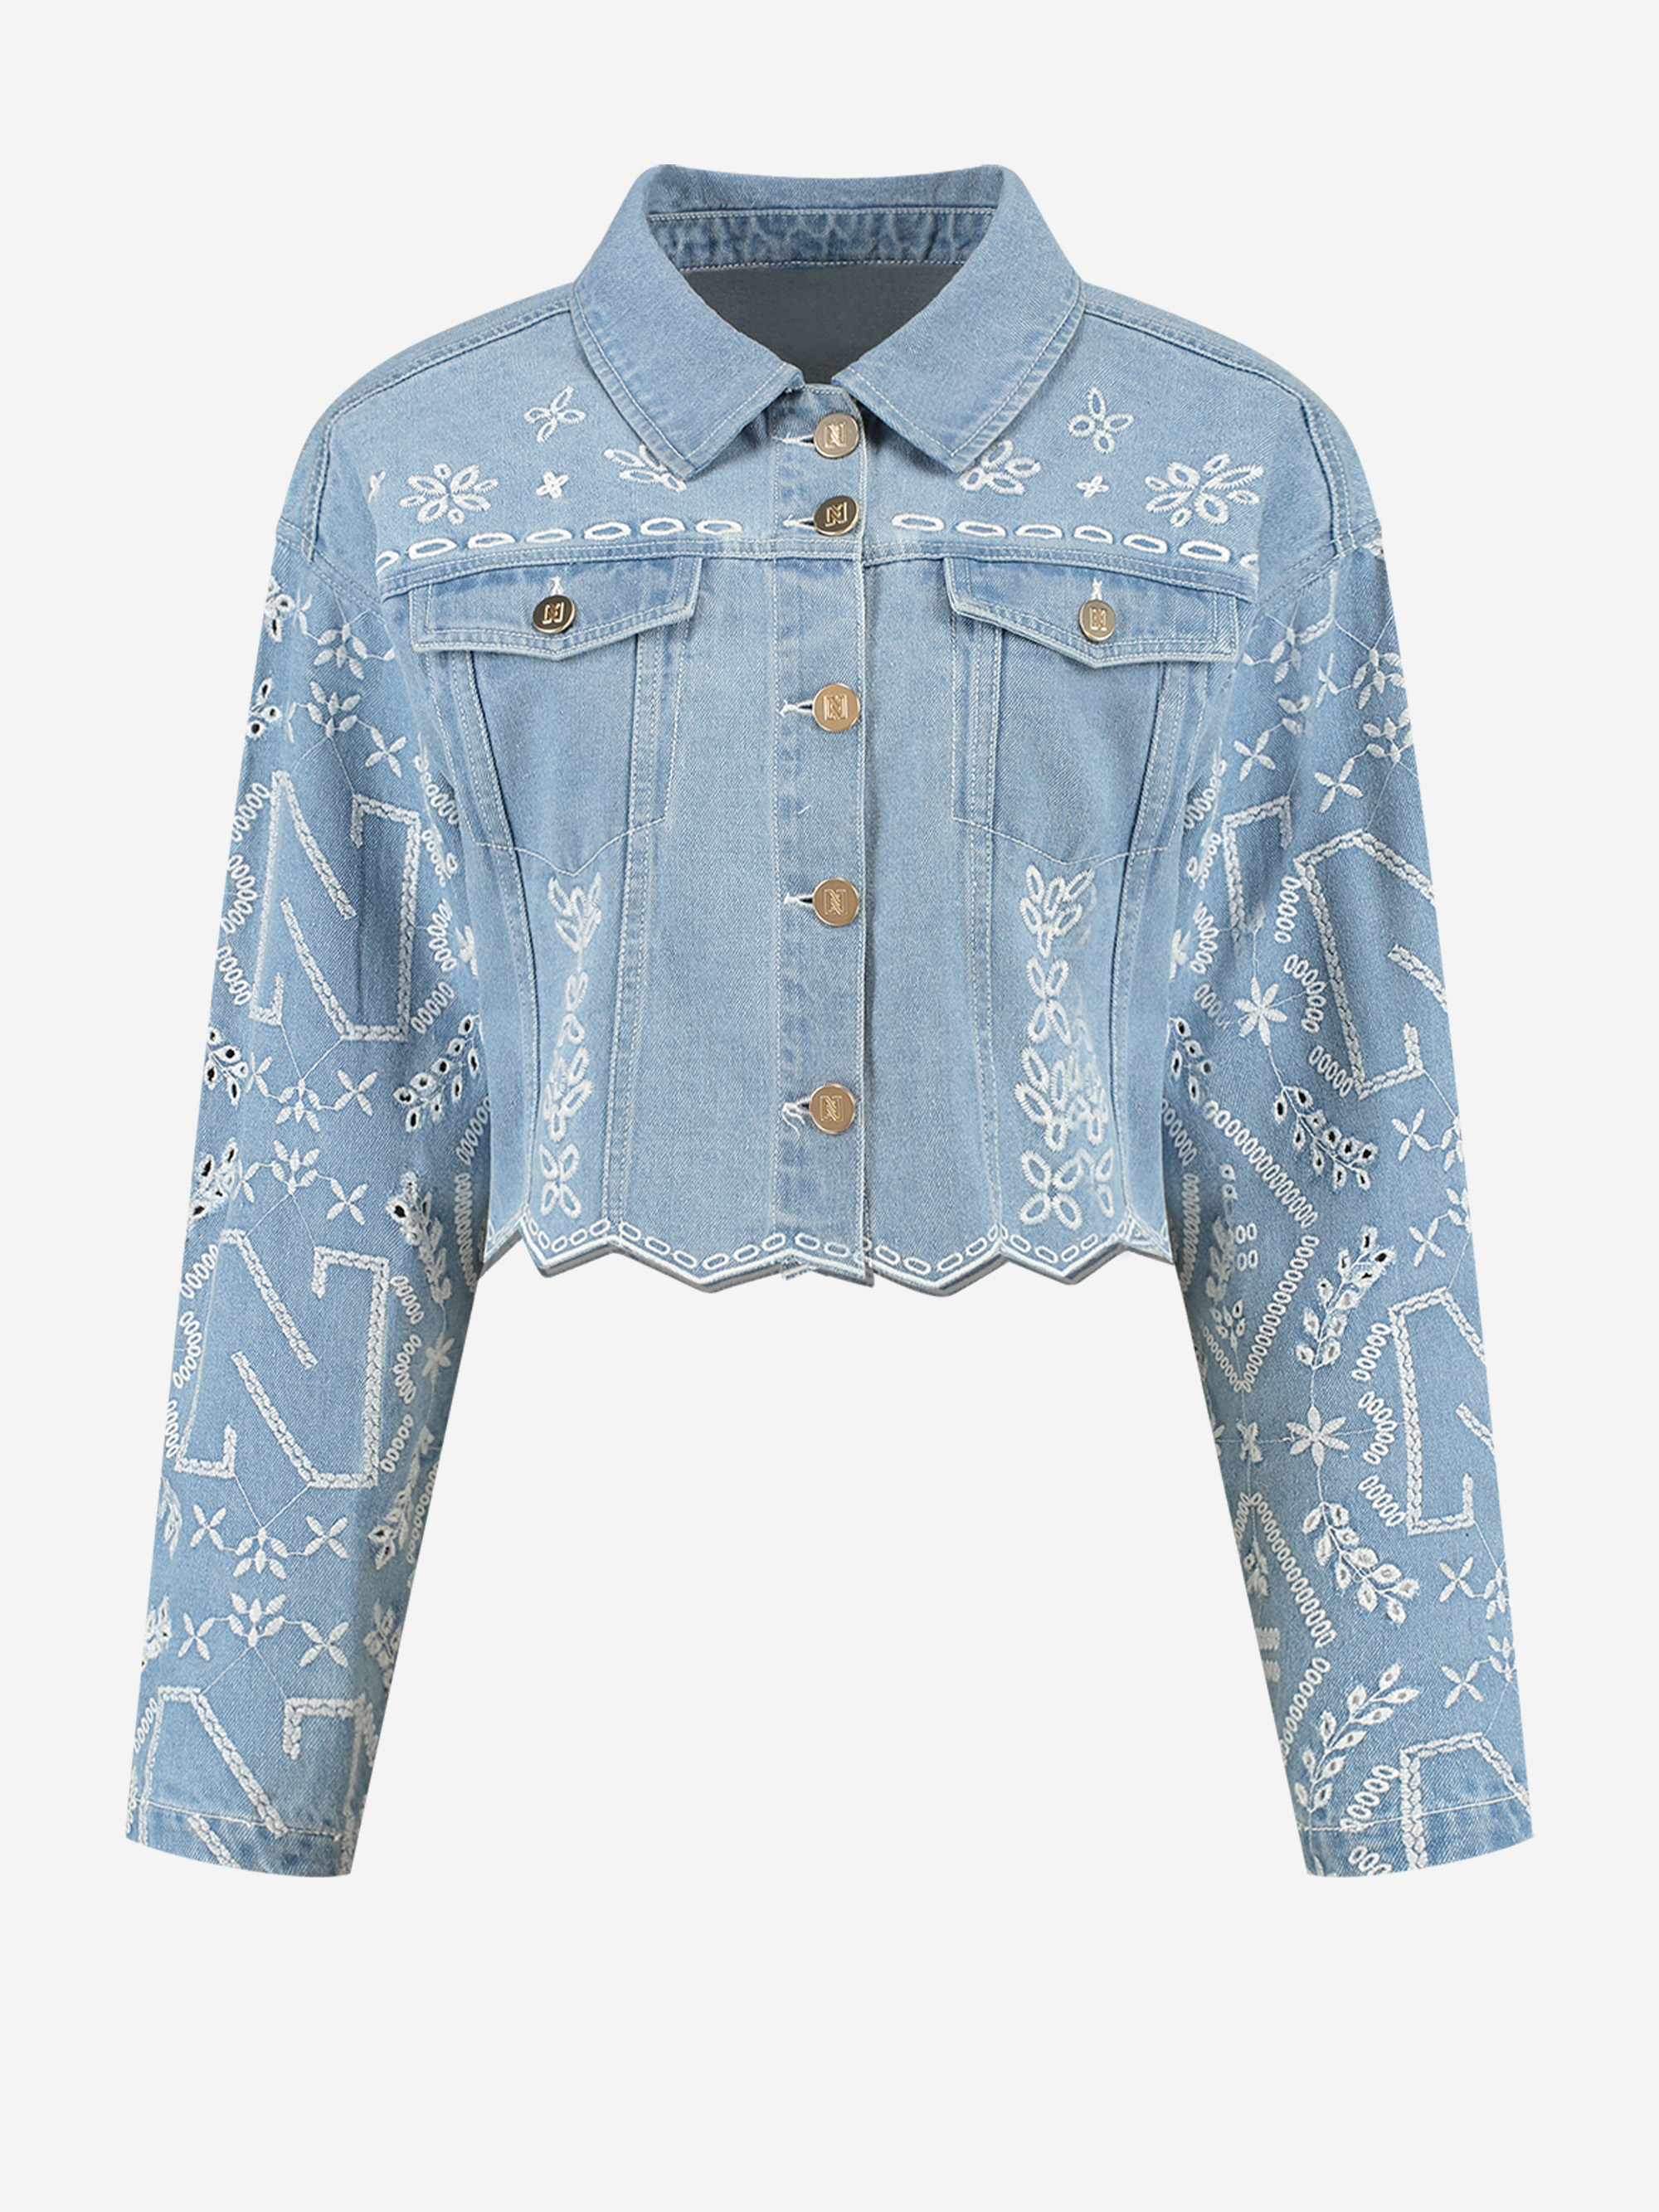 Denim jacket with embroidery